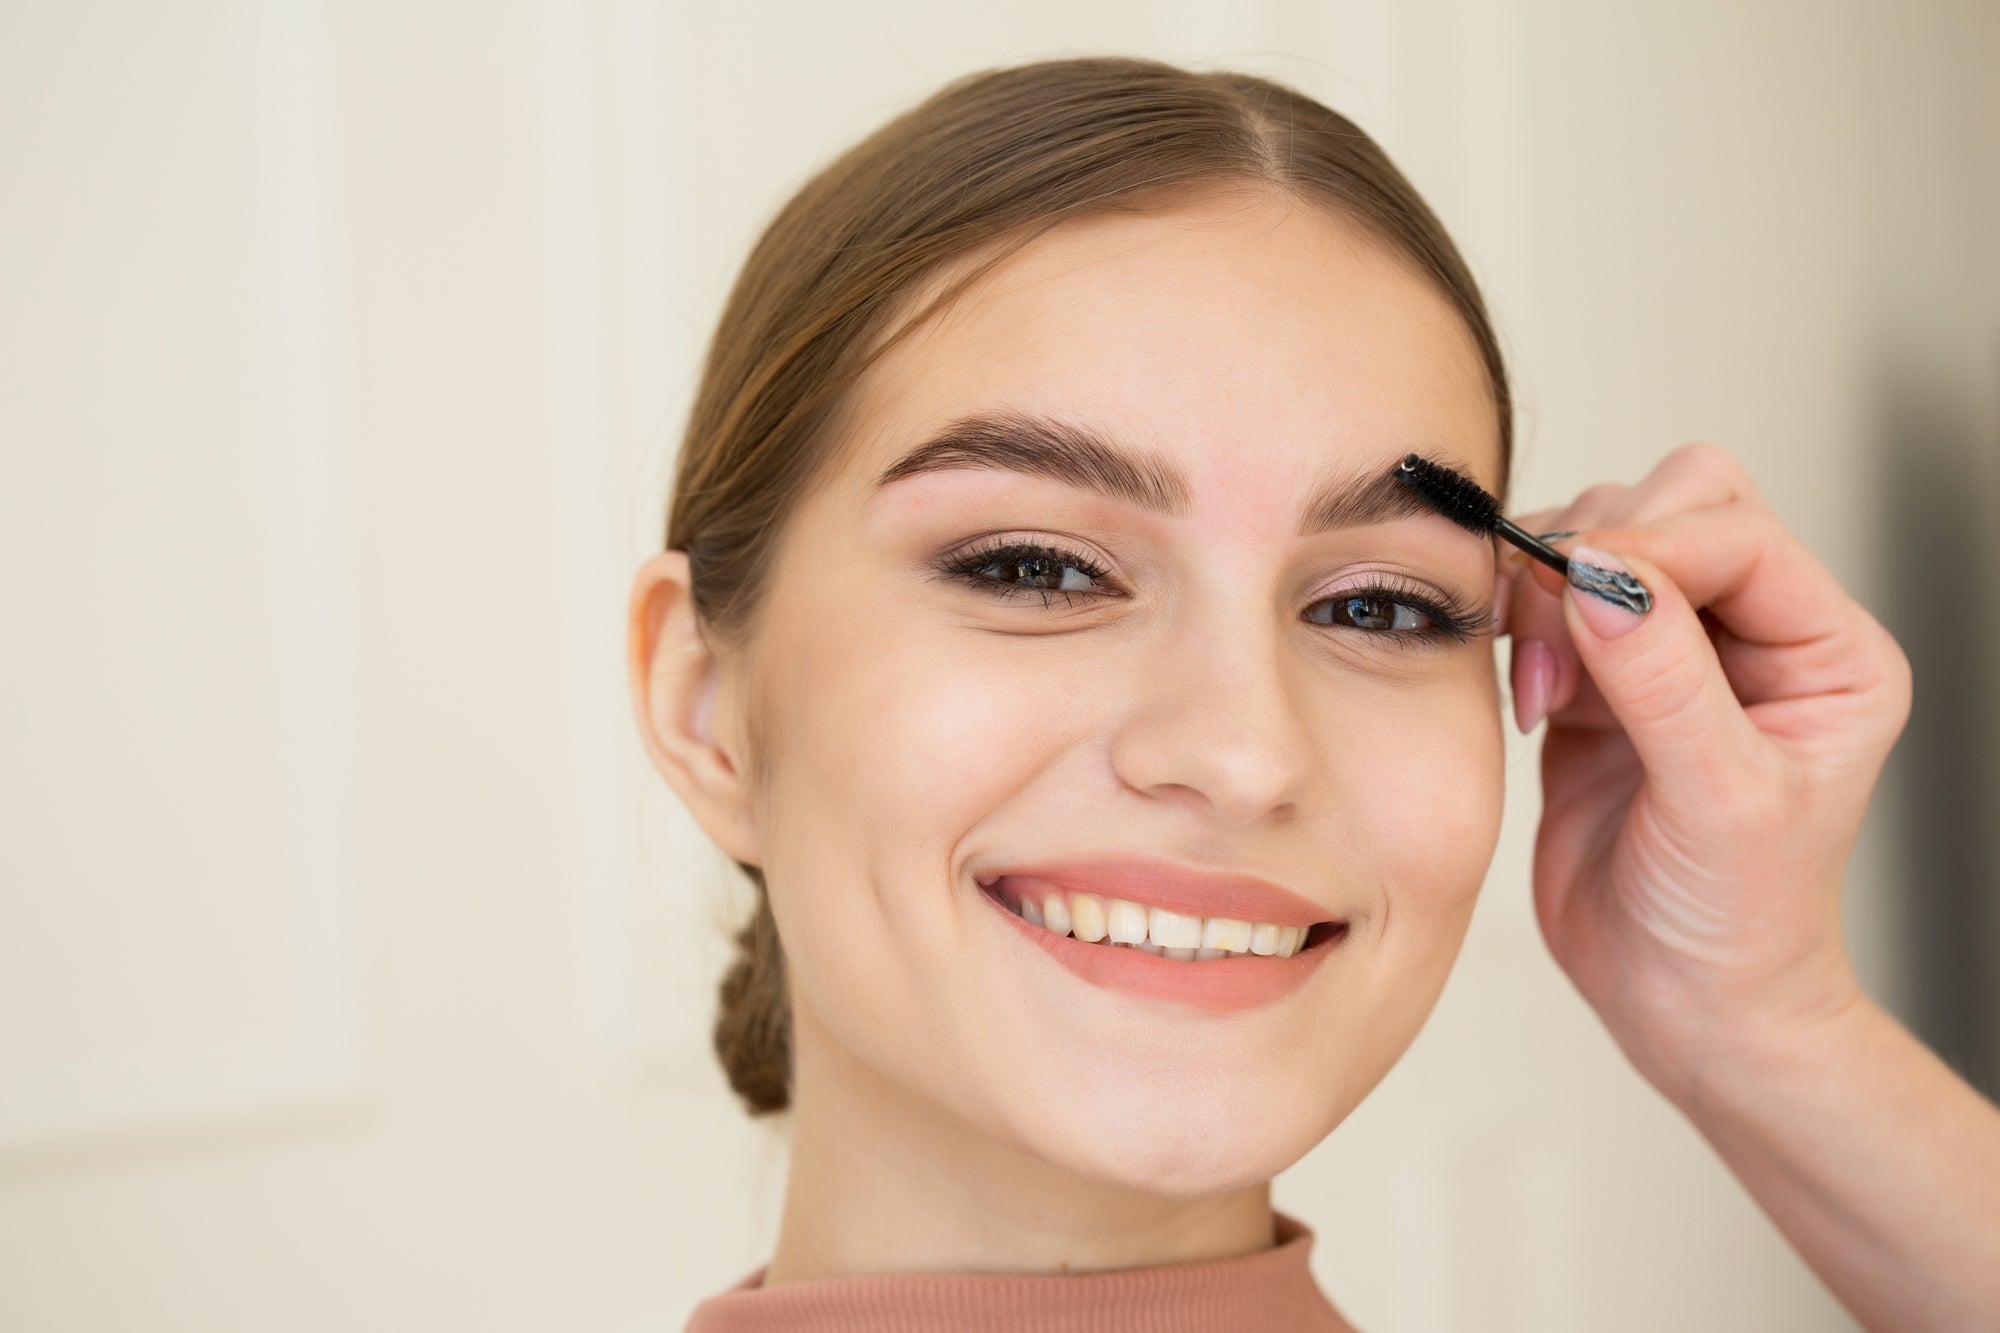 How To Thicken Eyebrows With Vegan Products